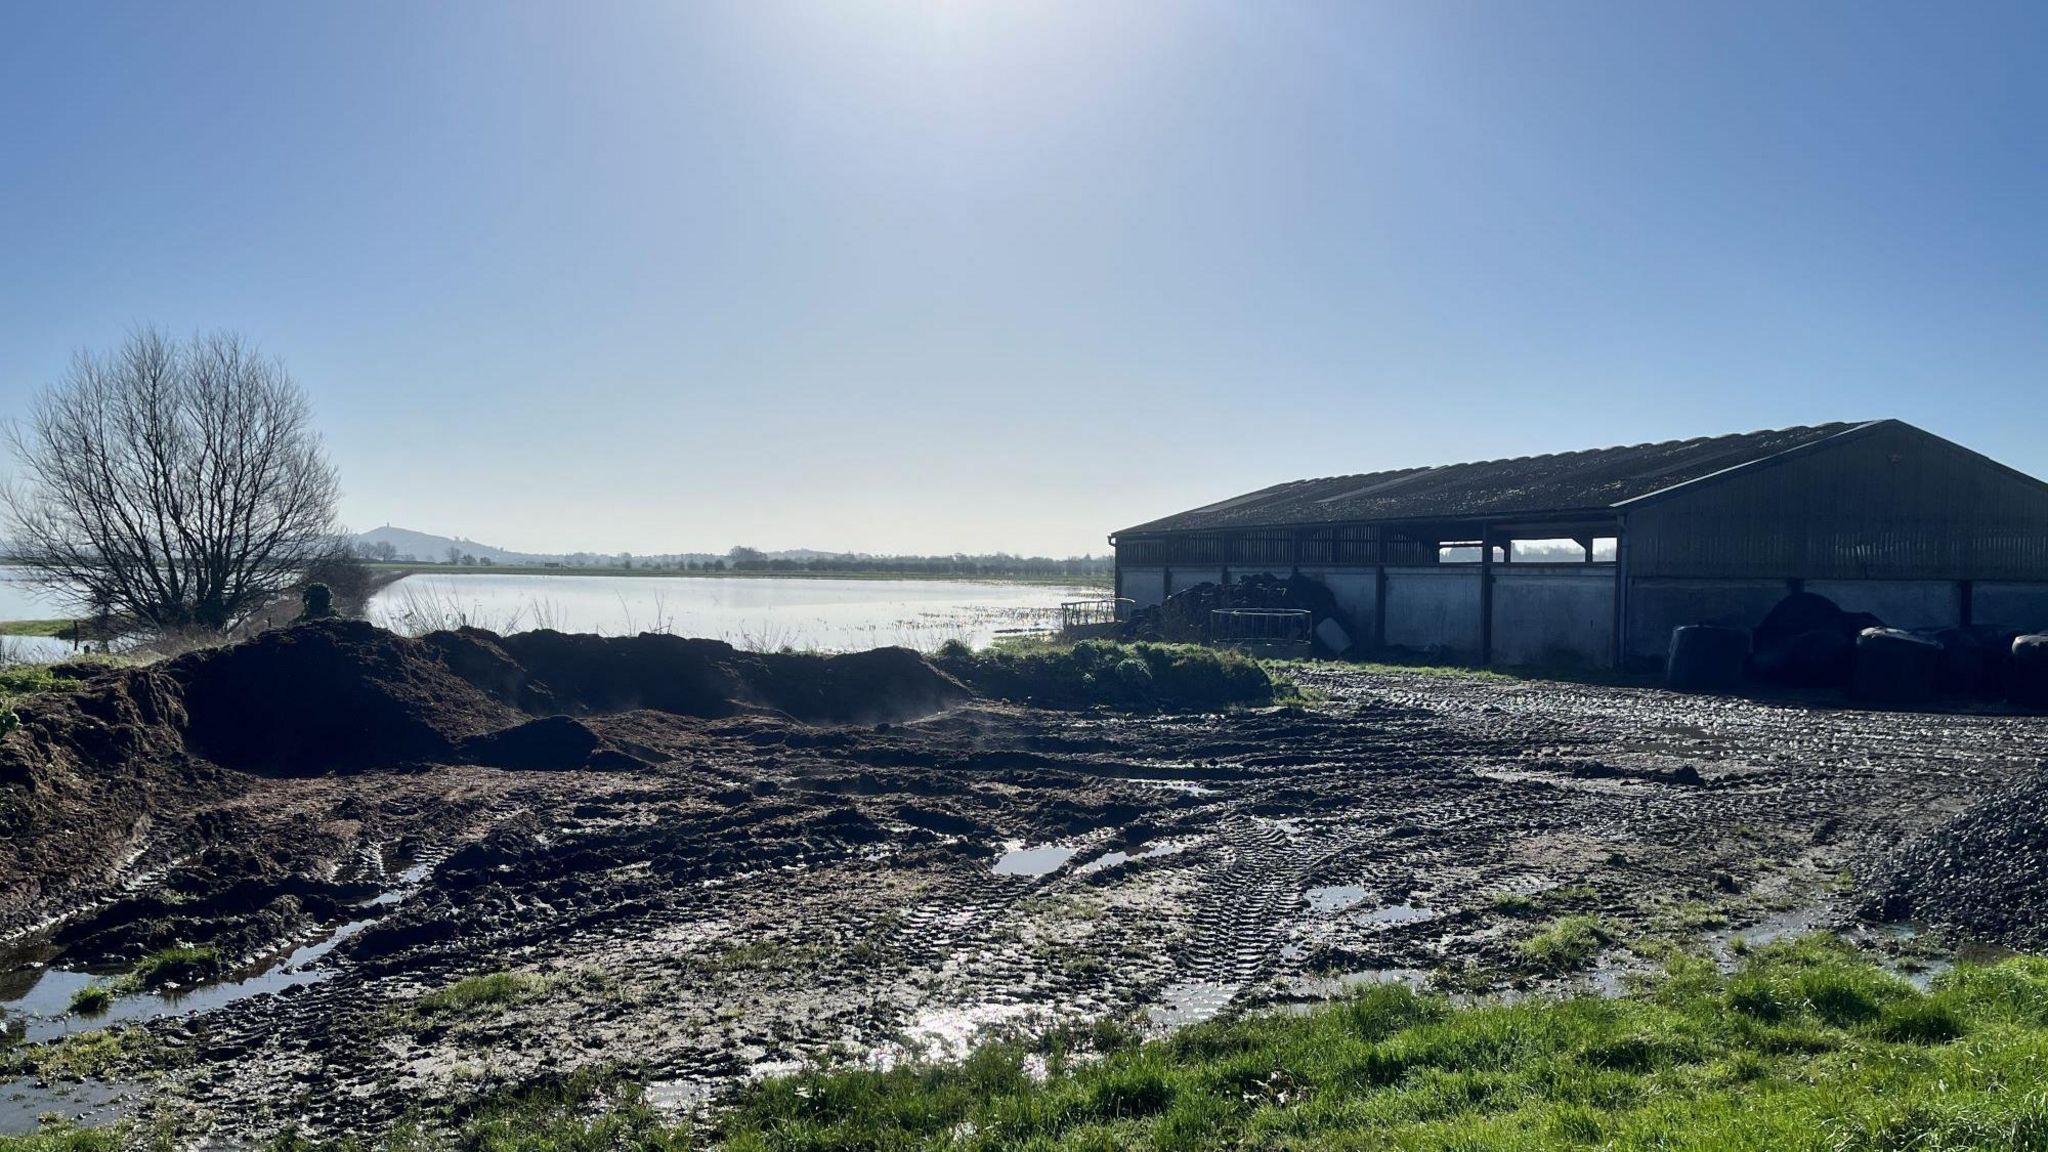 A farm building surrounded by floodwater